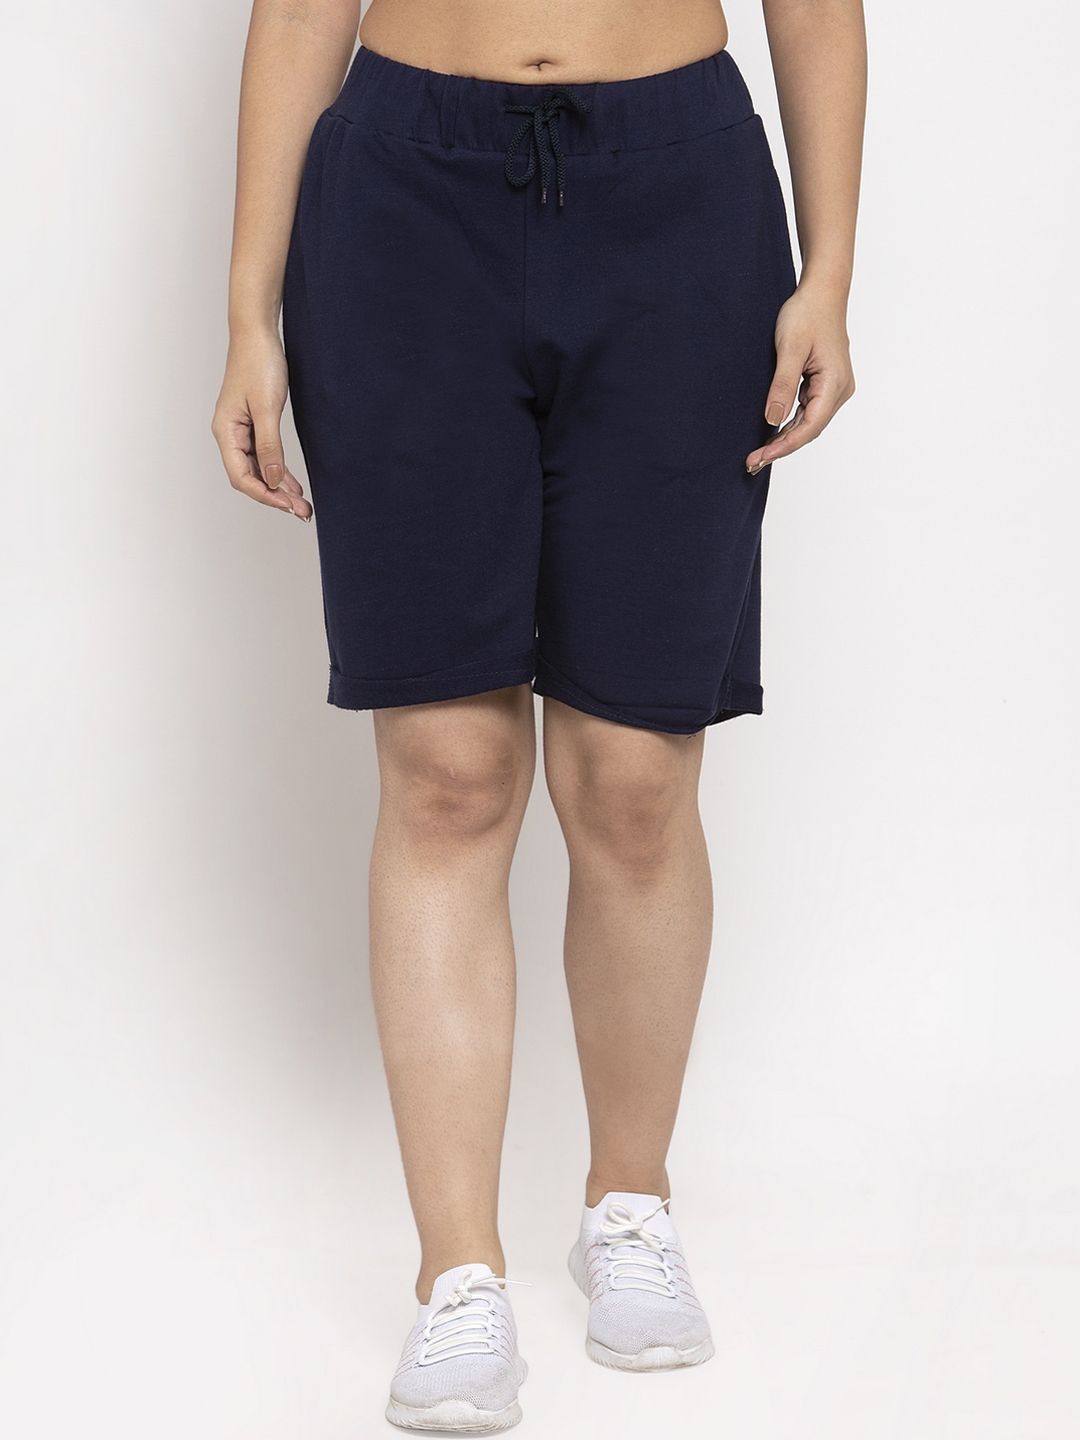 DOOR74 Women Navy Blue Solid Loose Fit Sports Shorts Price in India